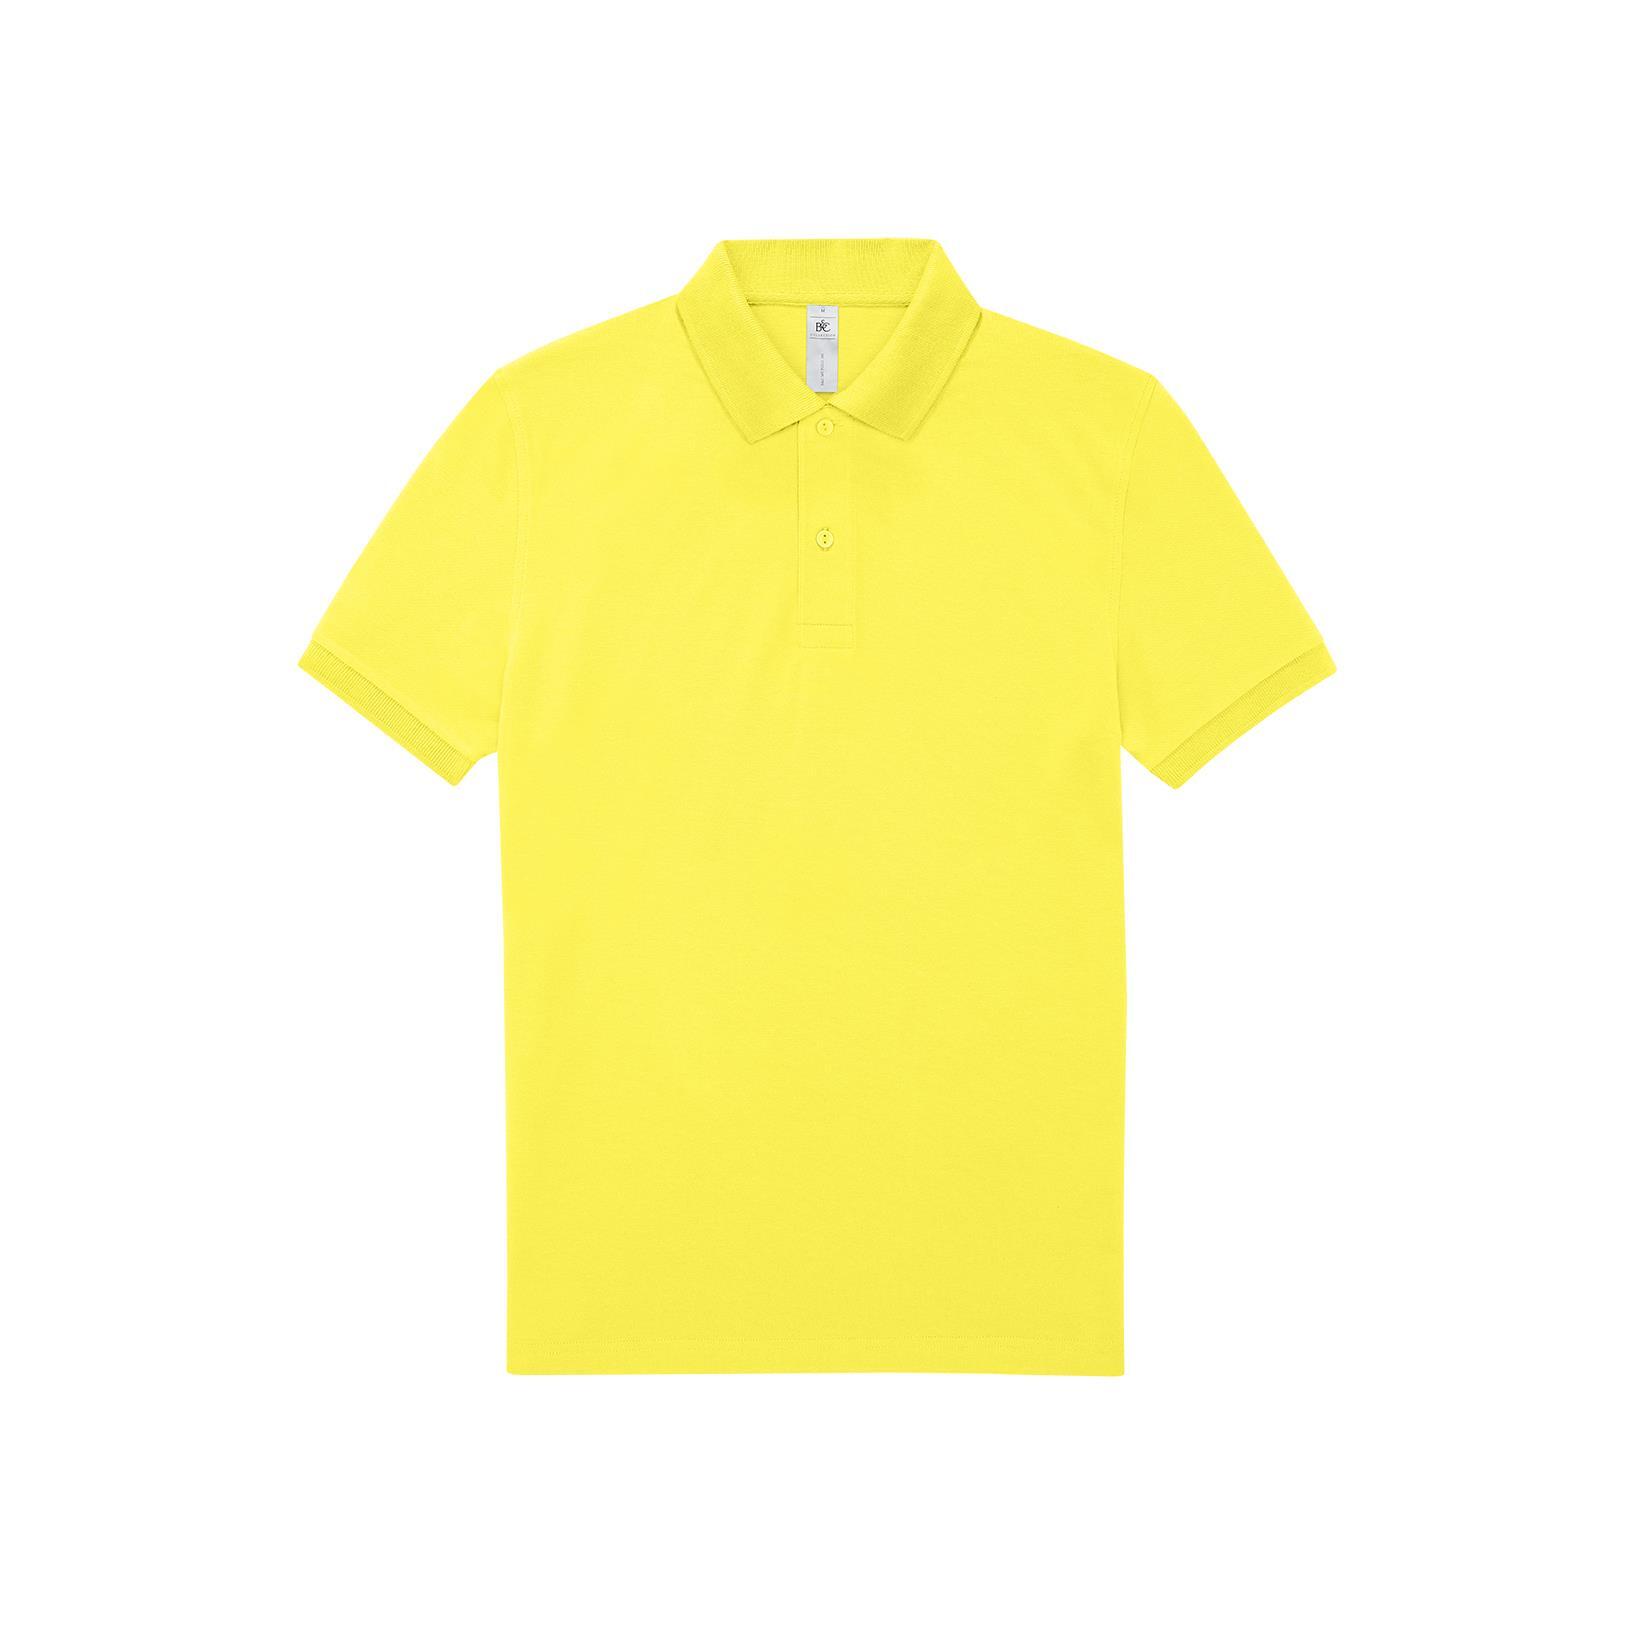 Polo voor mannen zonnegeel moderne polo